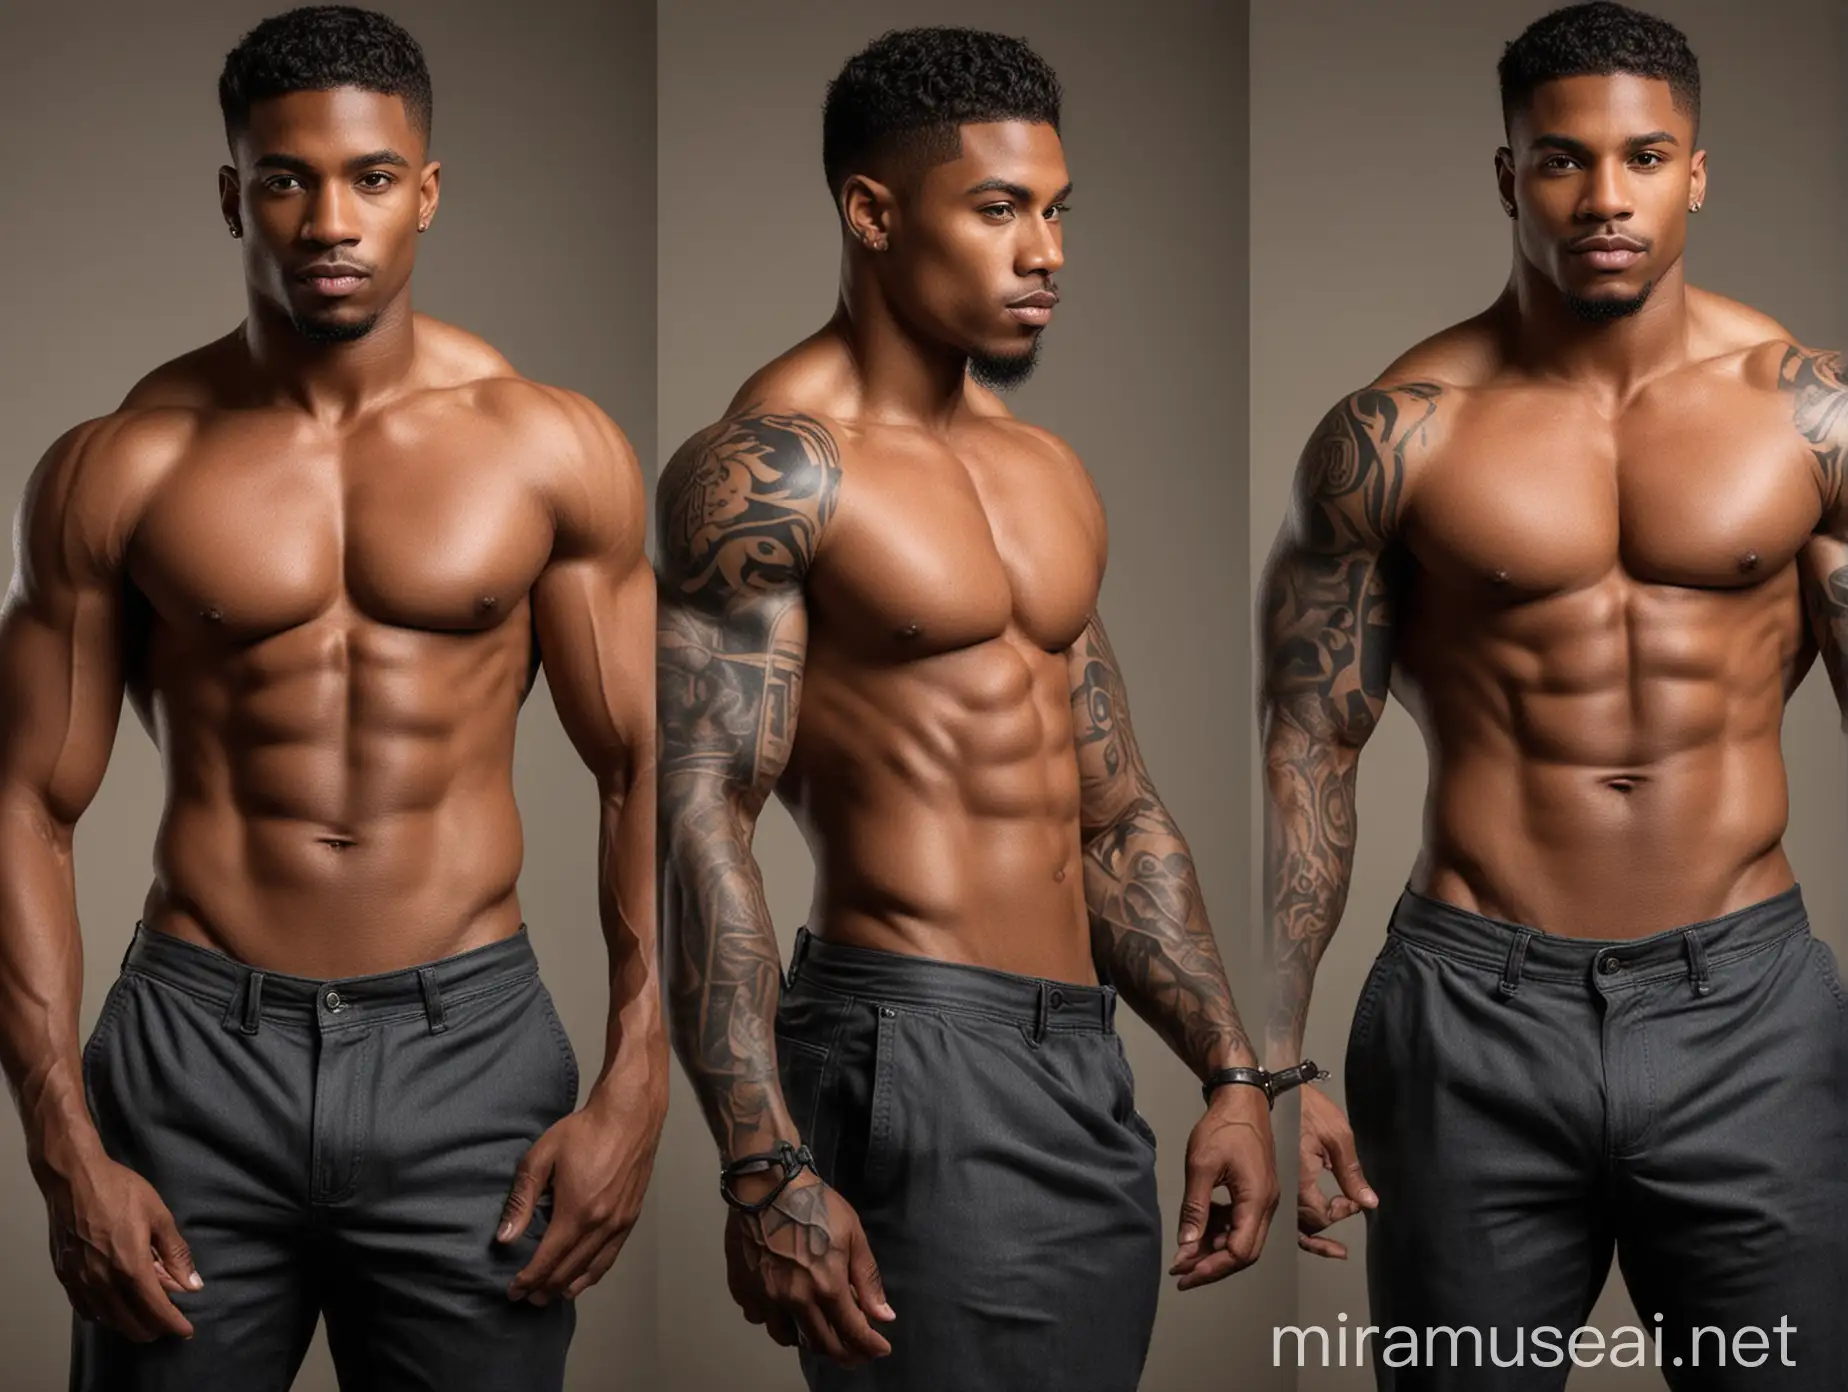 handsome black male, tight attractive clothes, attractive black male, handsome male, dominant male, attractive black male, master, muscular, muscular body, very muscular, heavily muscular, dominant muscular male, smooth skin, sexual, masculine, hypermasculine, sleeve tattoo, tight clothes, tight pants, tight shirt, alpha male, hypermasculine, tight clothes, tight shirt, tall, masculine, muscular, strong masculine muscular man, large pecs, muscular pecs, small waist, v-taper body, muscular deltoids, large chest, large butt, shapely butt, round butt